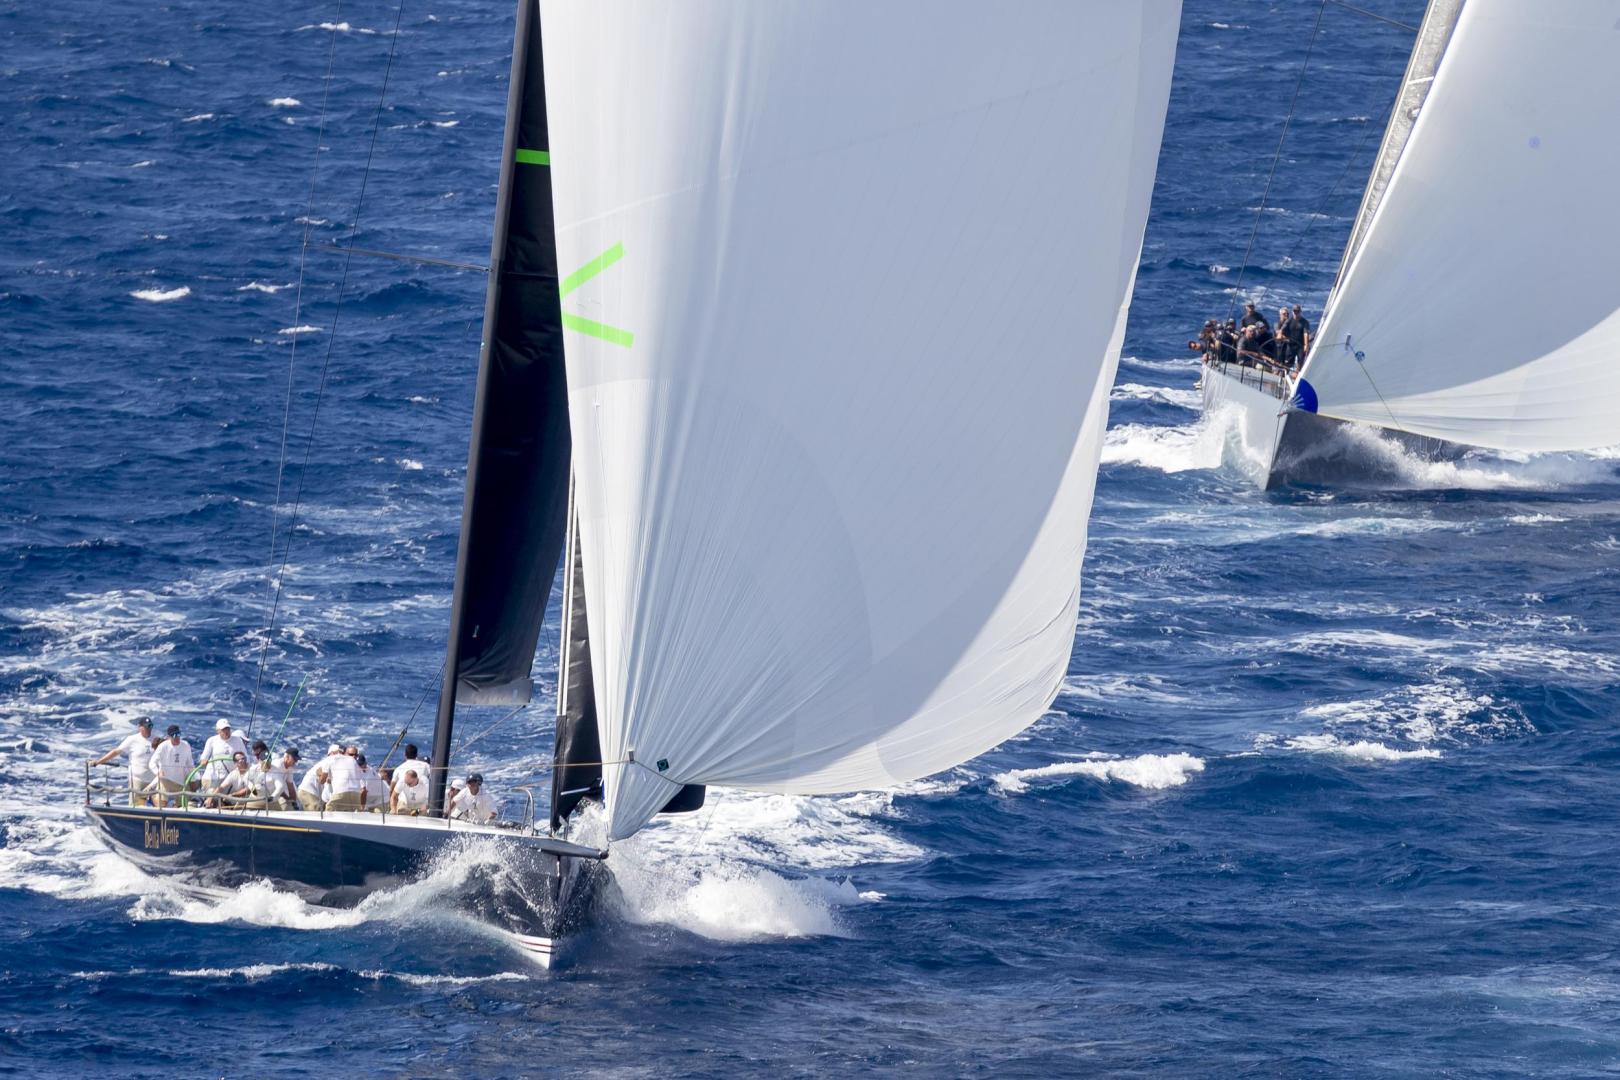 Bella Mente leads Sorcha (now North-Star) at the 2019 Maxi Yacht Rolex Cup.